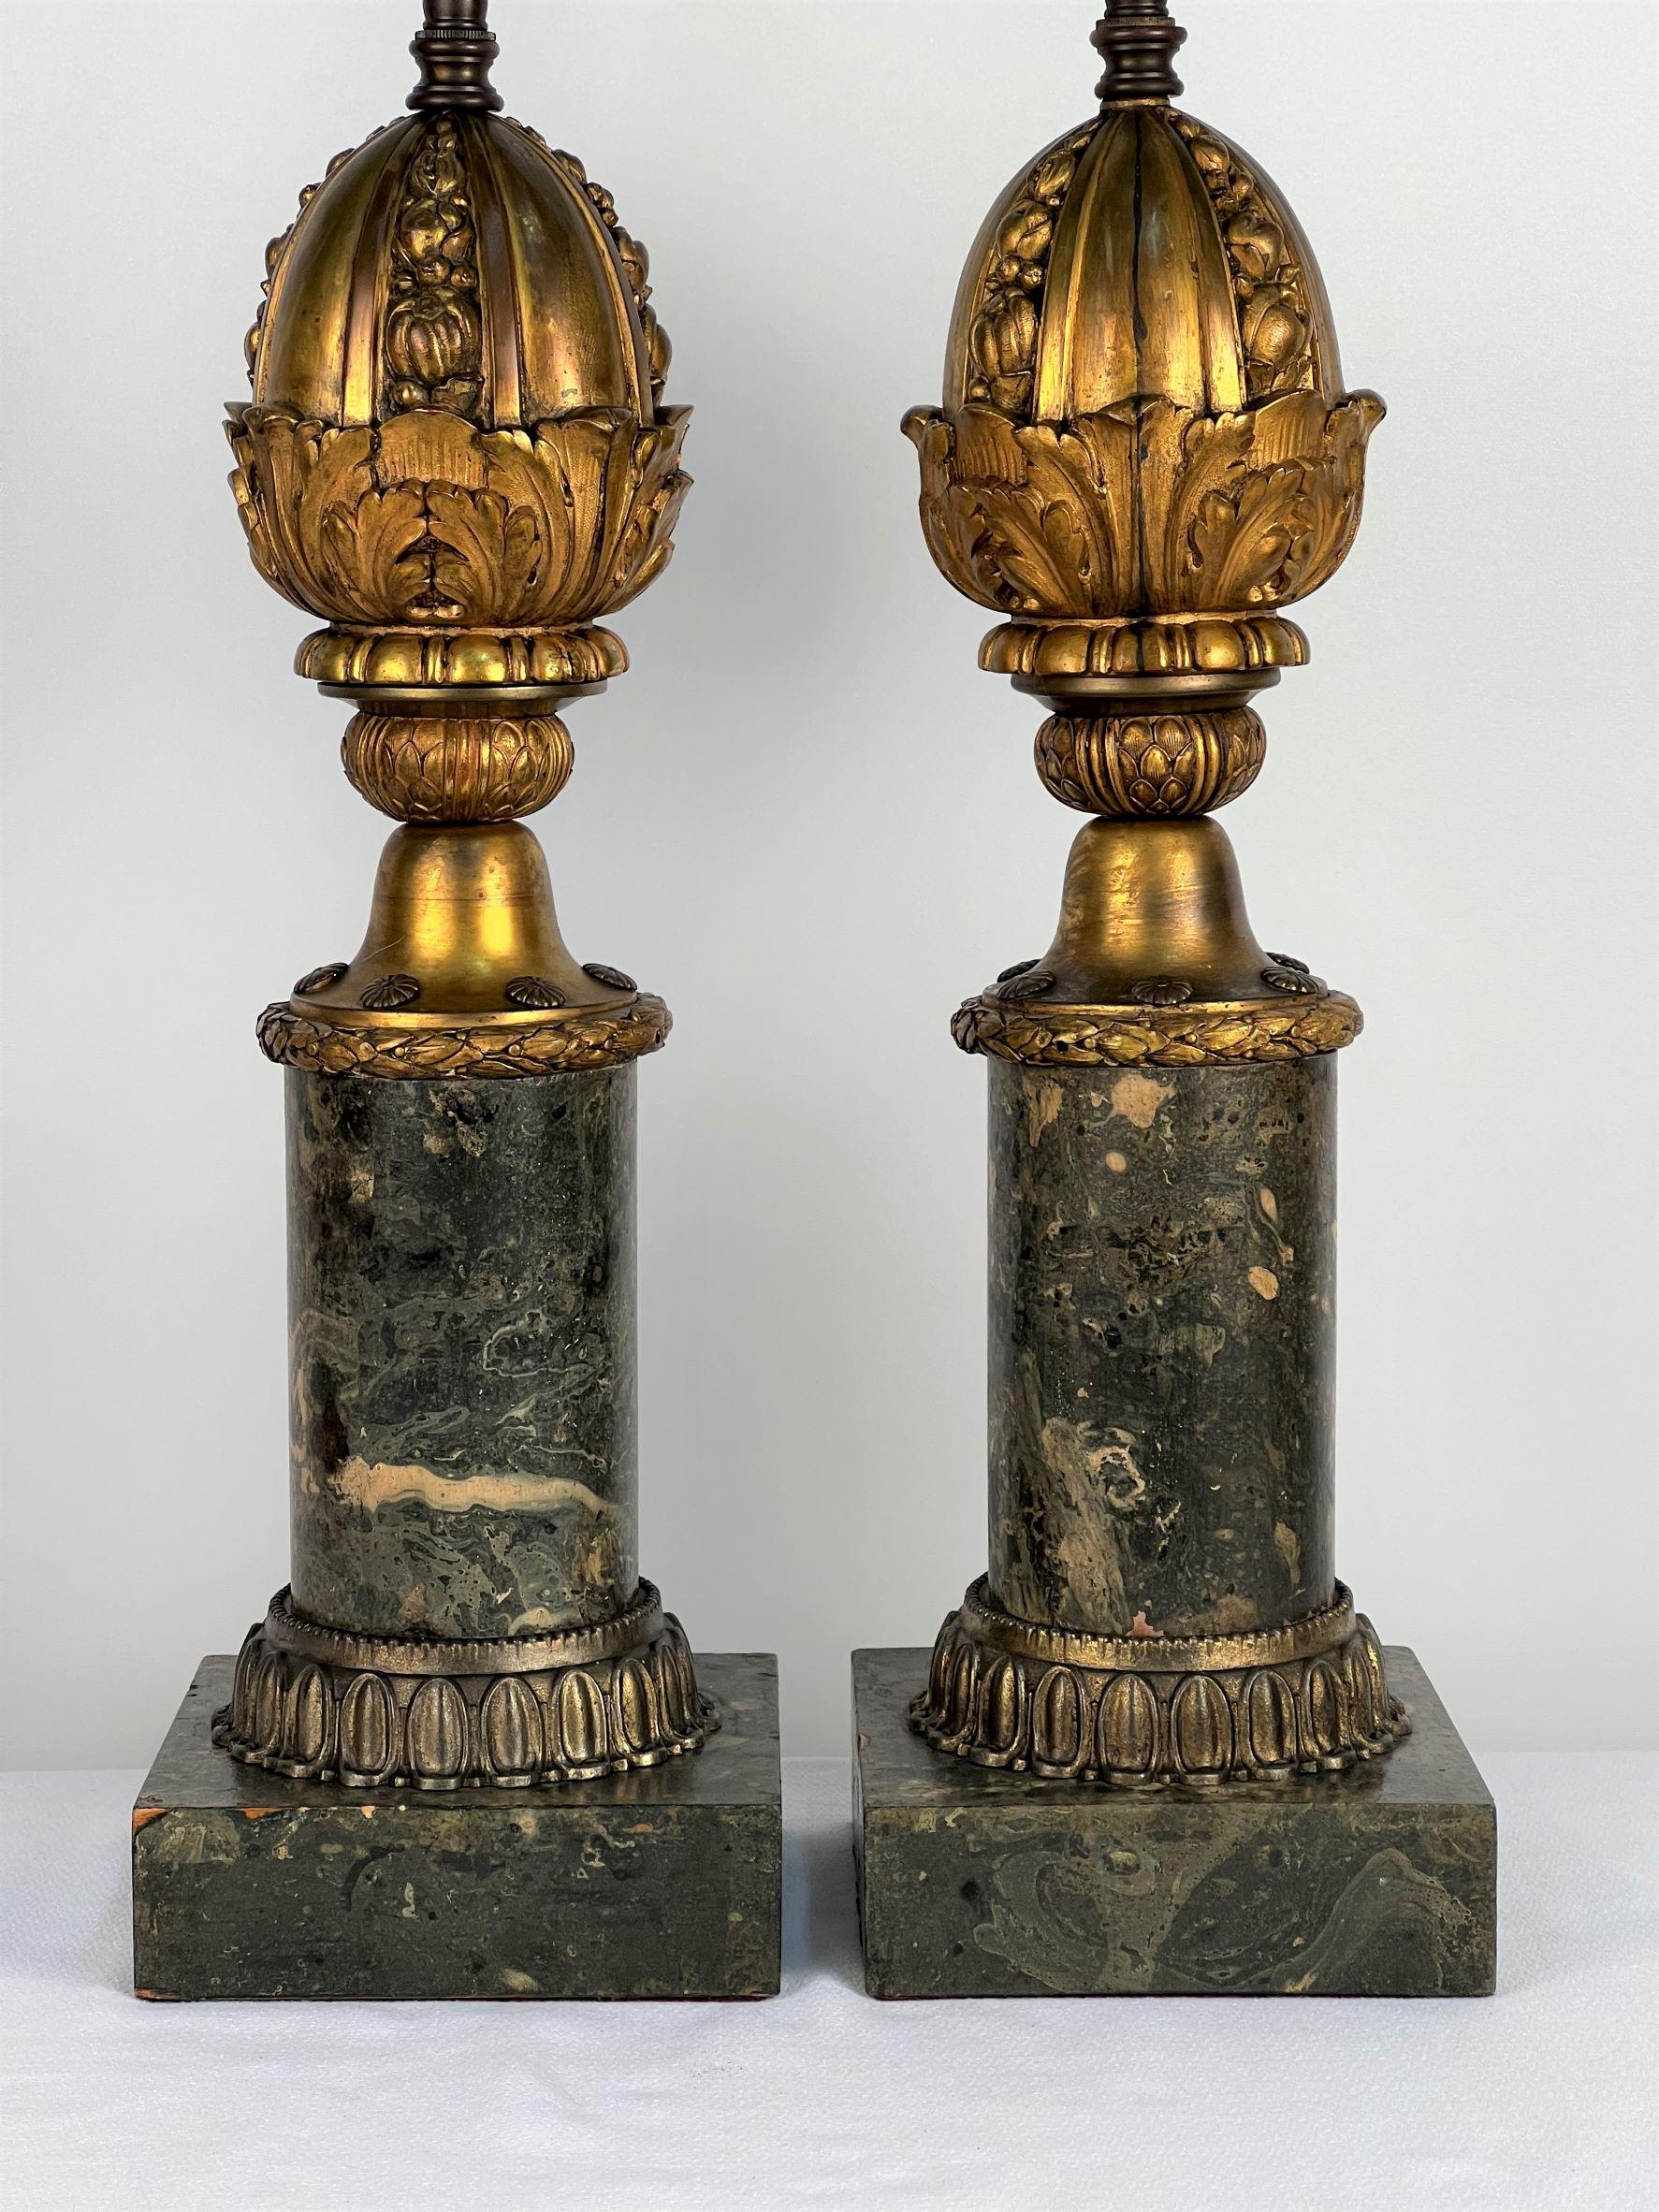 An exceptional pair of gilt cast bronze pomegranate shapes nestled in acanthus leaf cups mounted to faux marble pedestals ending in square faux marble basses. Decorative applied rosettes are mounted above laurel wreath bands. The faux marble has a